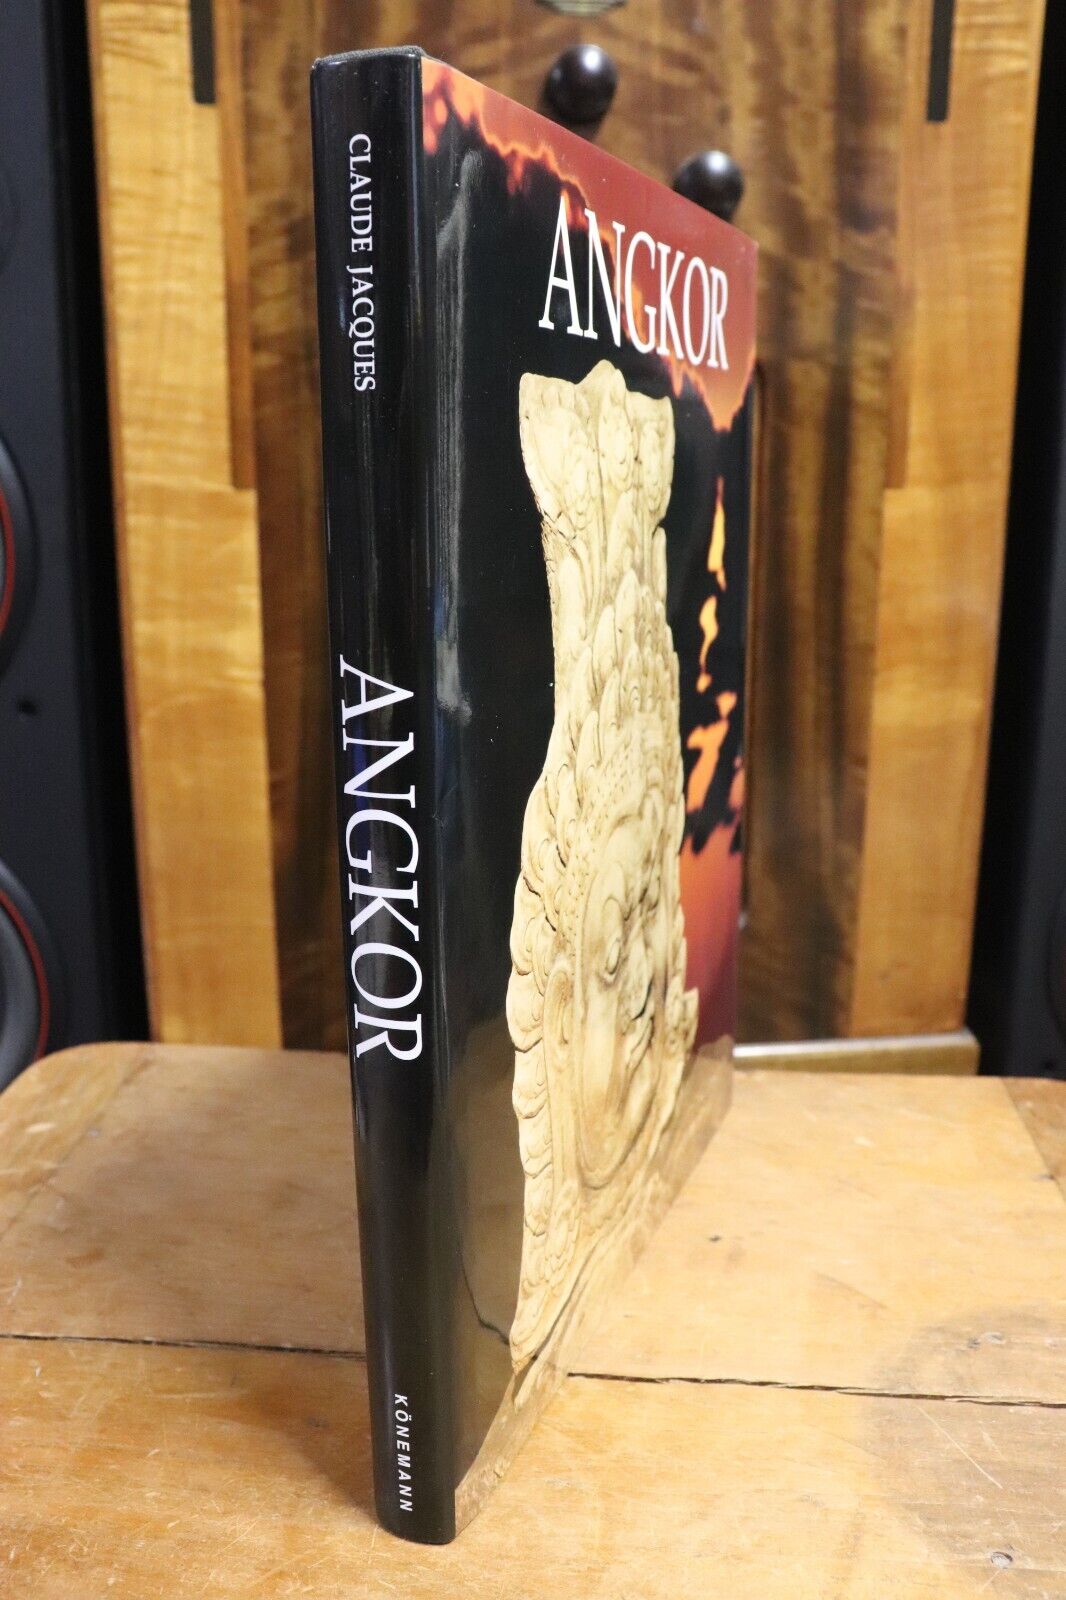 Angkor by Claude Jacques - 1999 - Large Print History & Architecture Book - 0